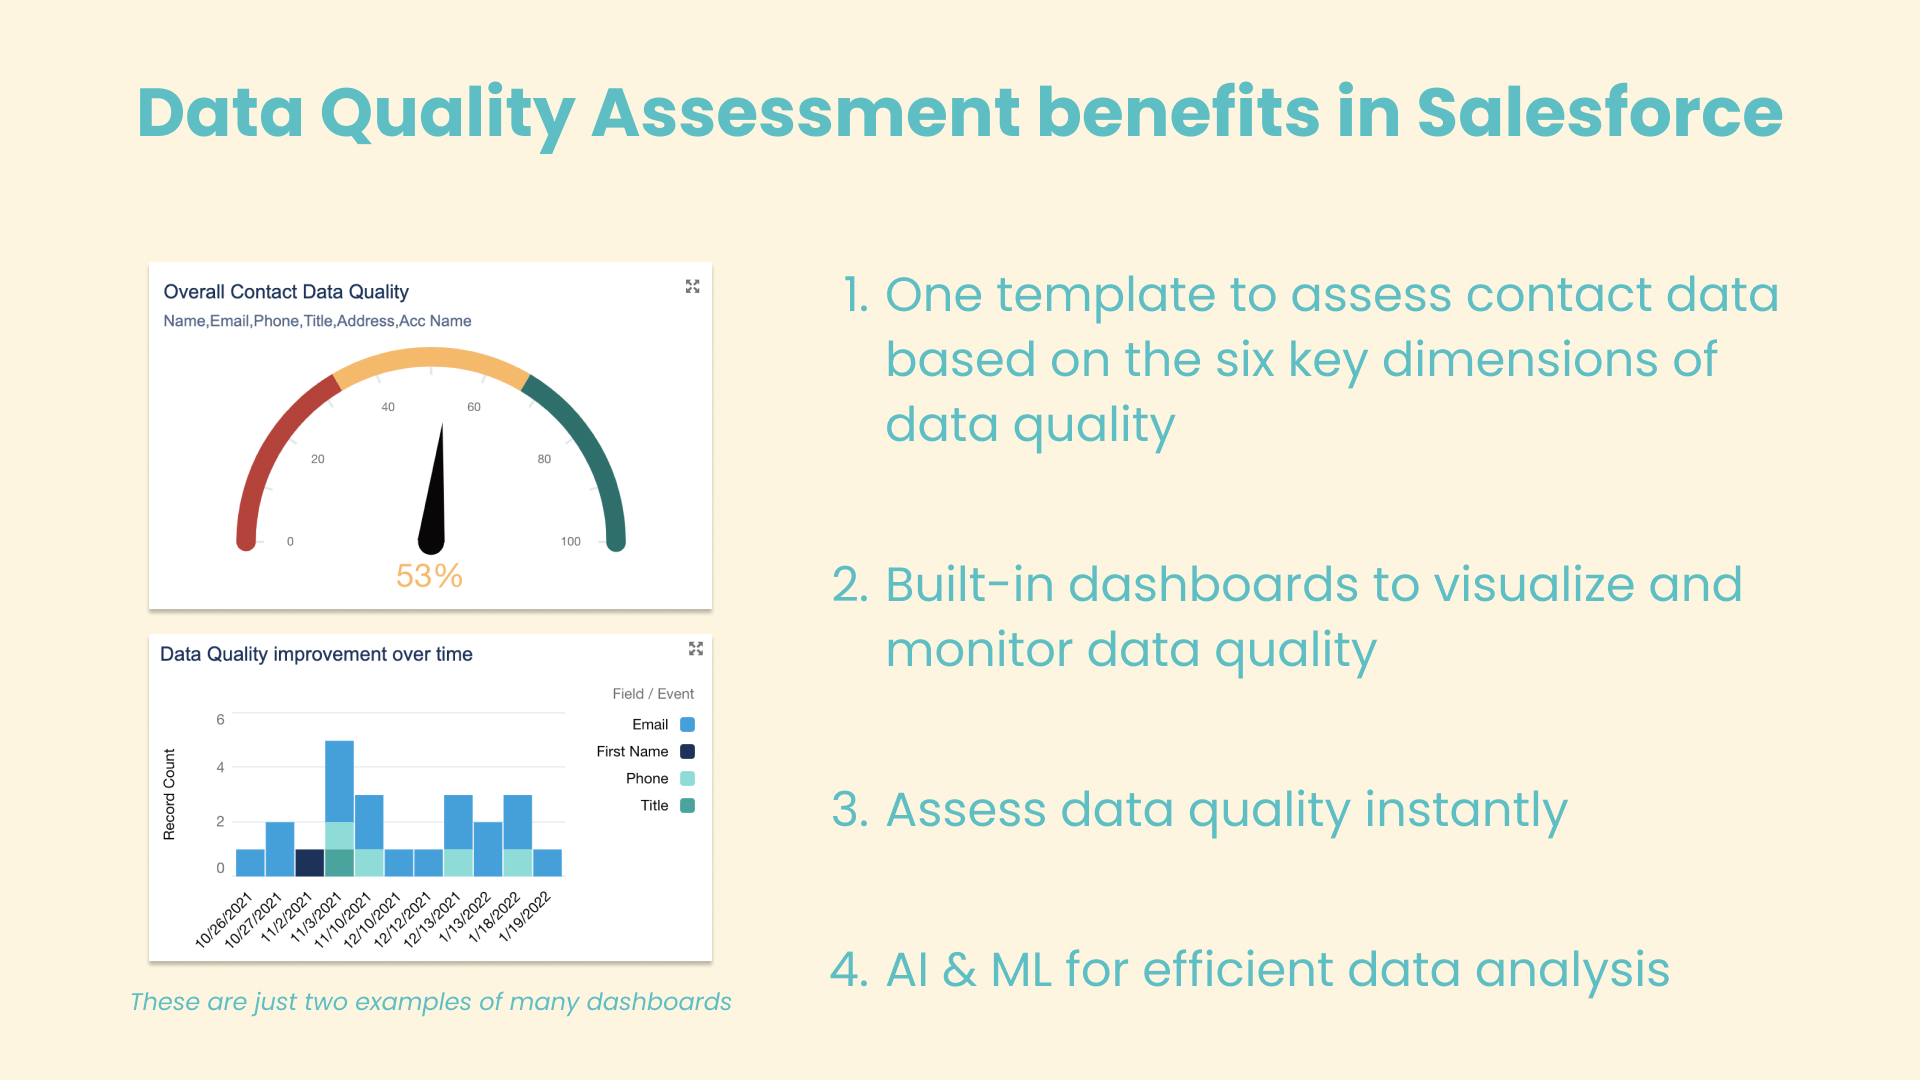 Using Delpha to assess your data gives you results based on the six key dimensions of data quality, provides built-in dashboards to visualize and monitor the data, assess instantly and efficiently.